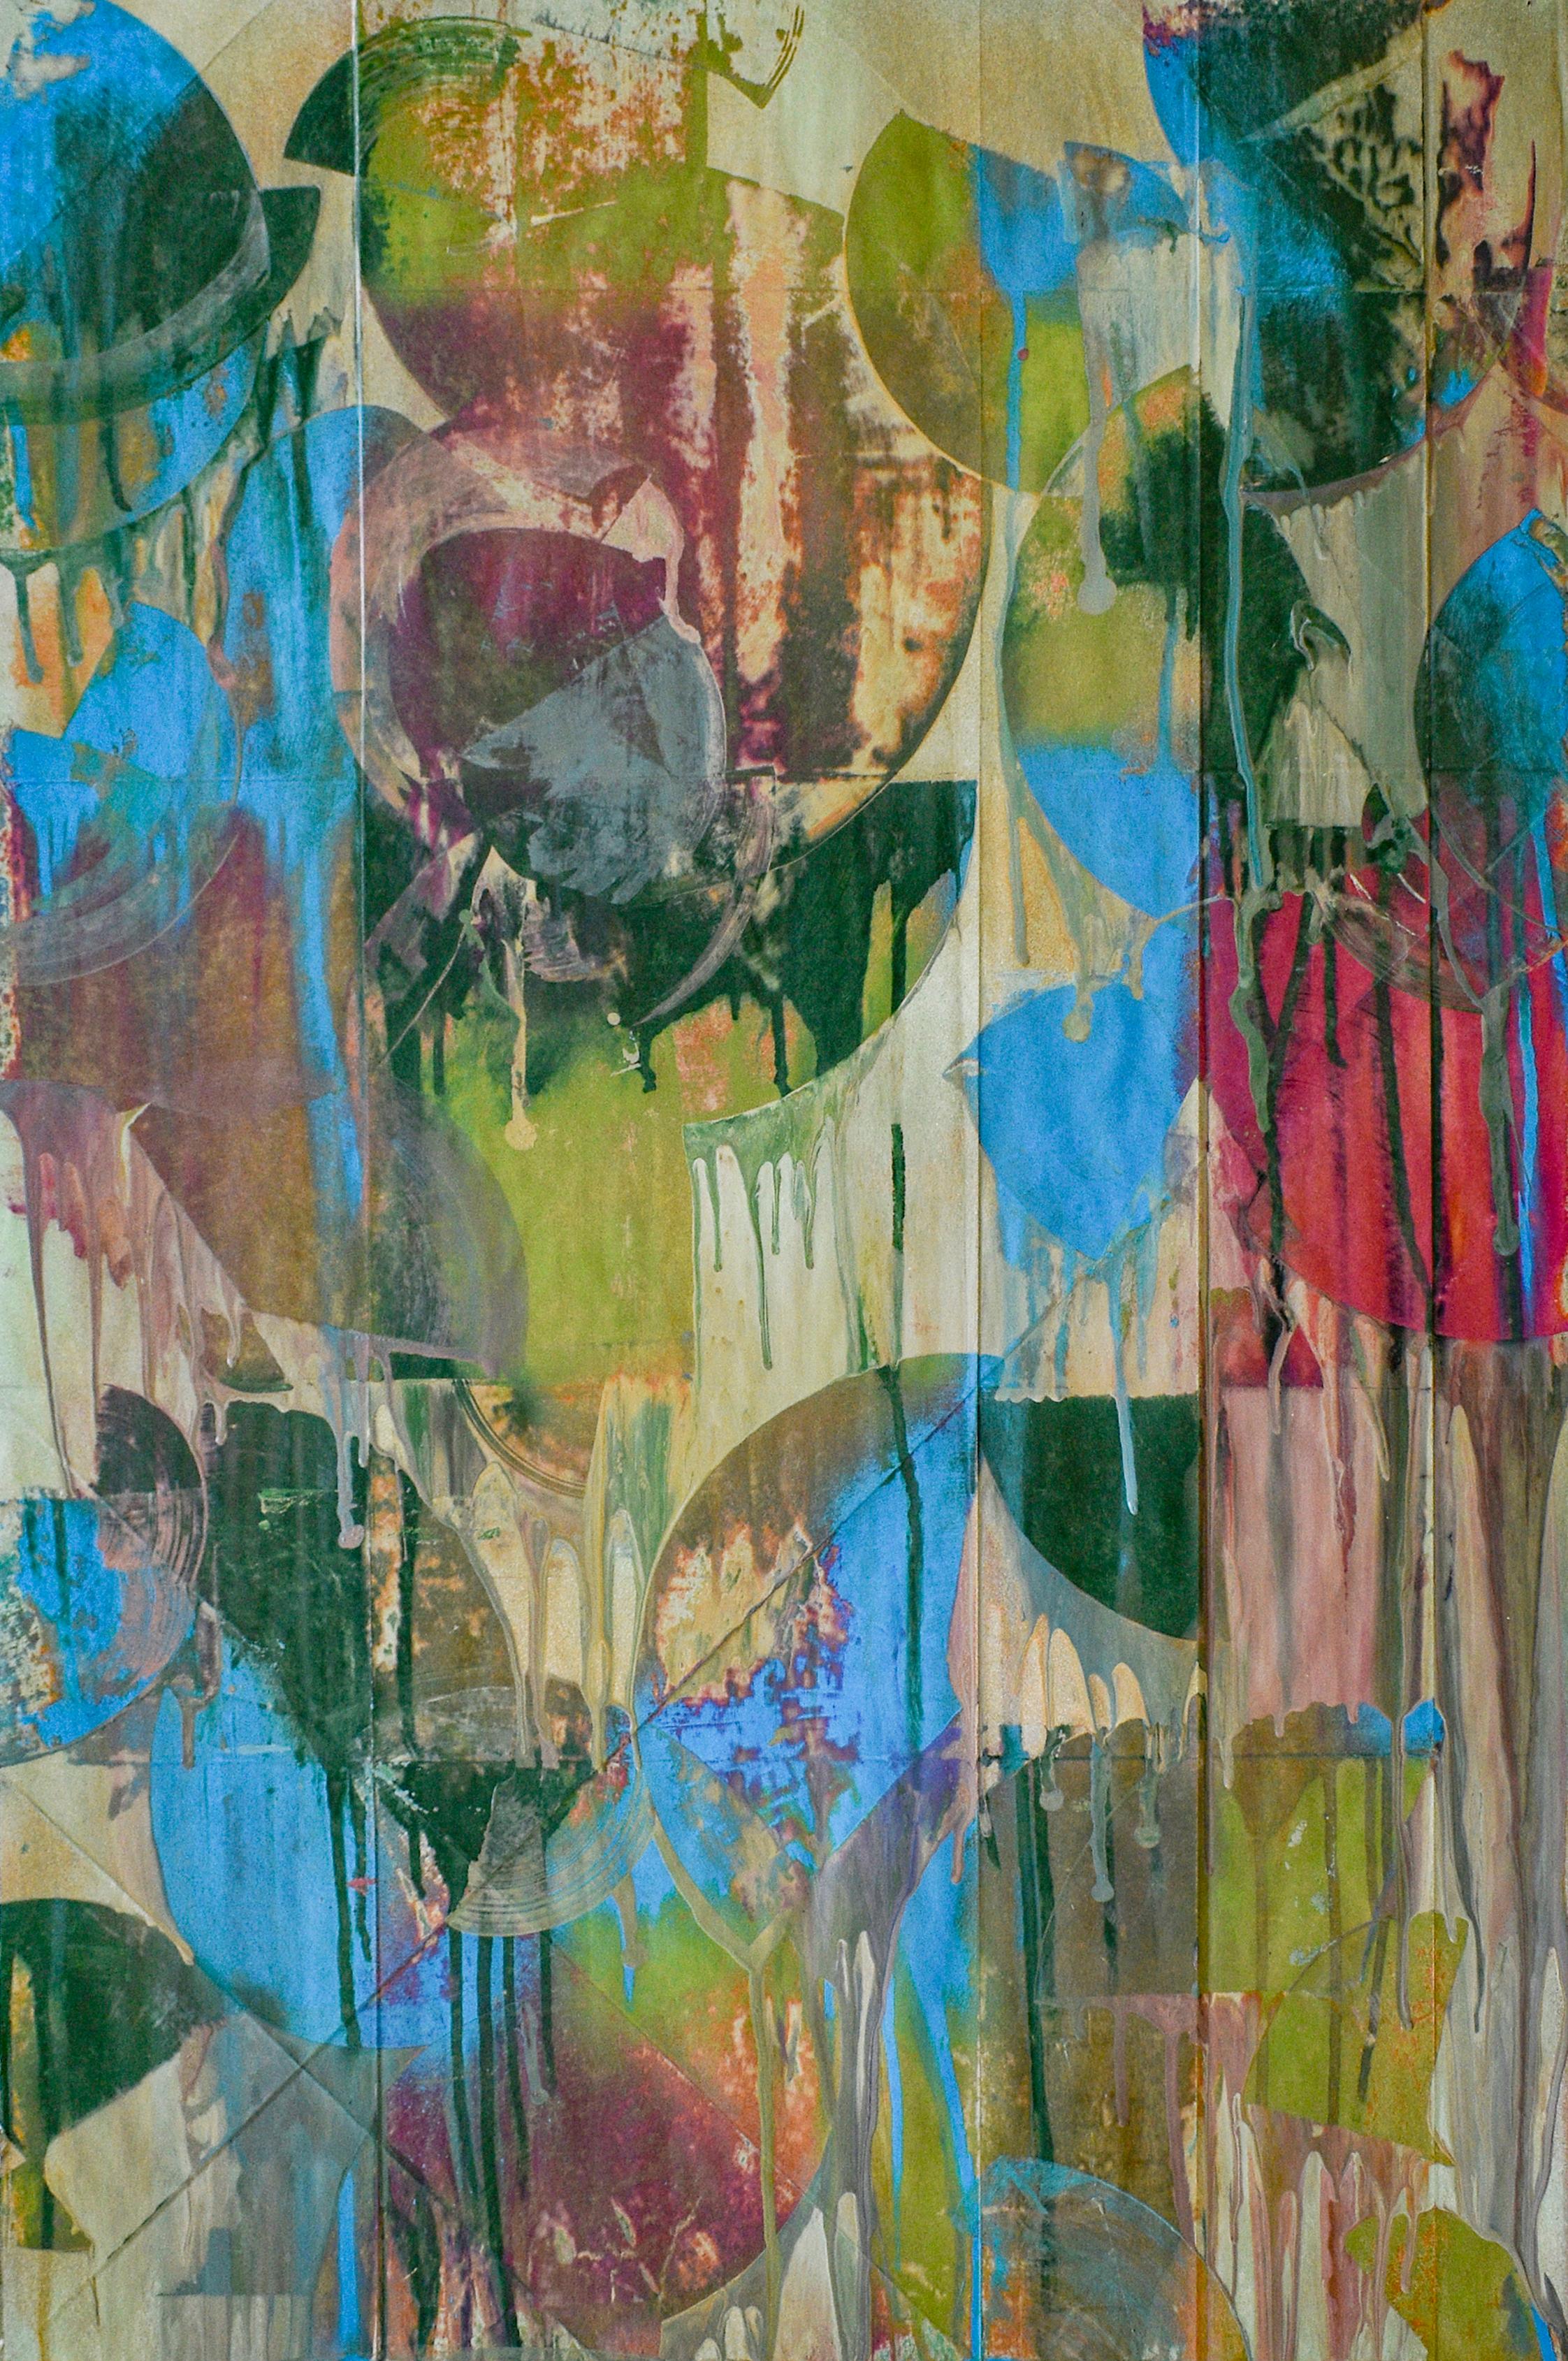 An Orgy of Delight (Abstract Expressionist Painting in Green, Blue and Fuschia)